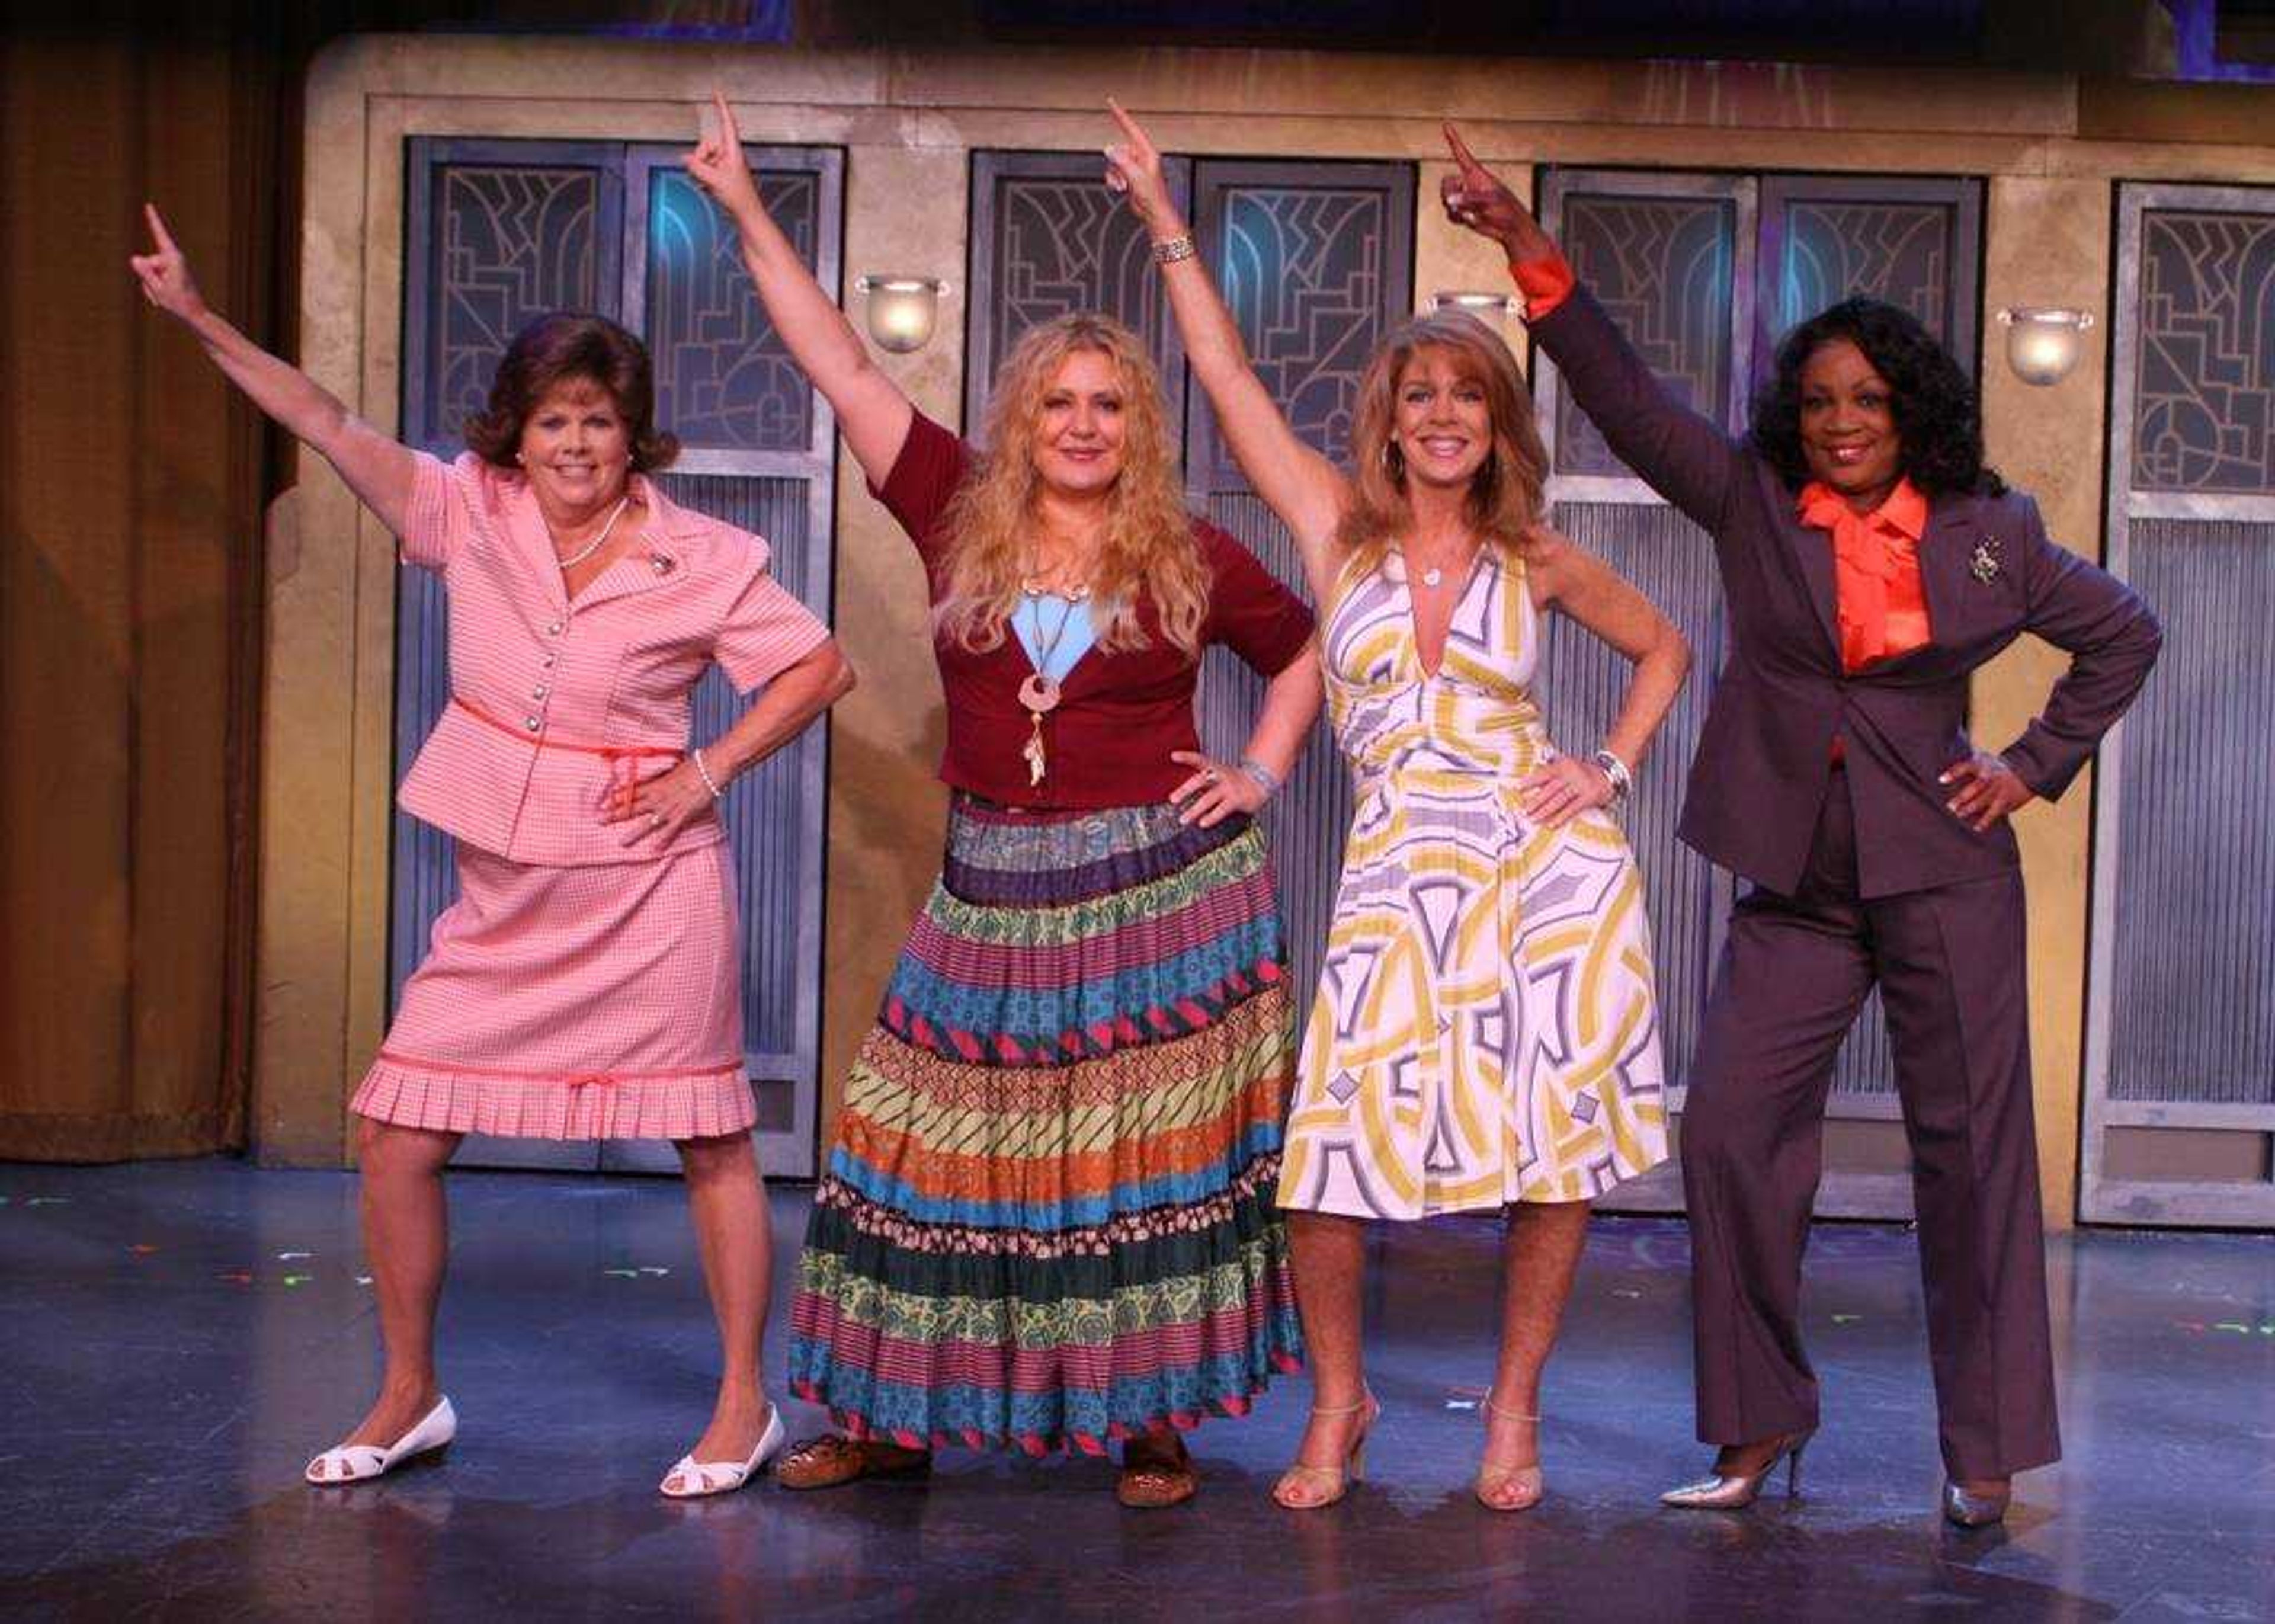 Menopause: The Musical comes to Cape Girardeau